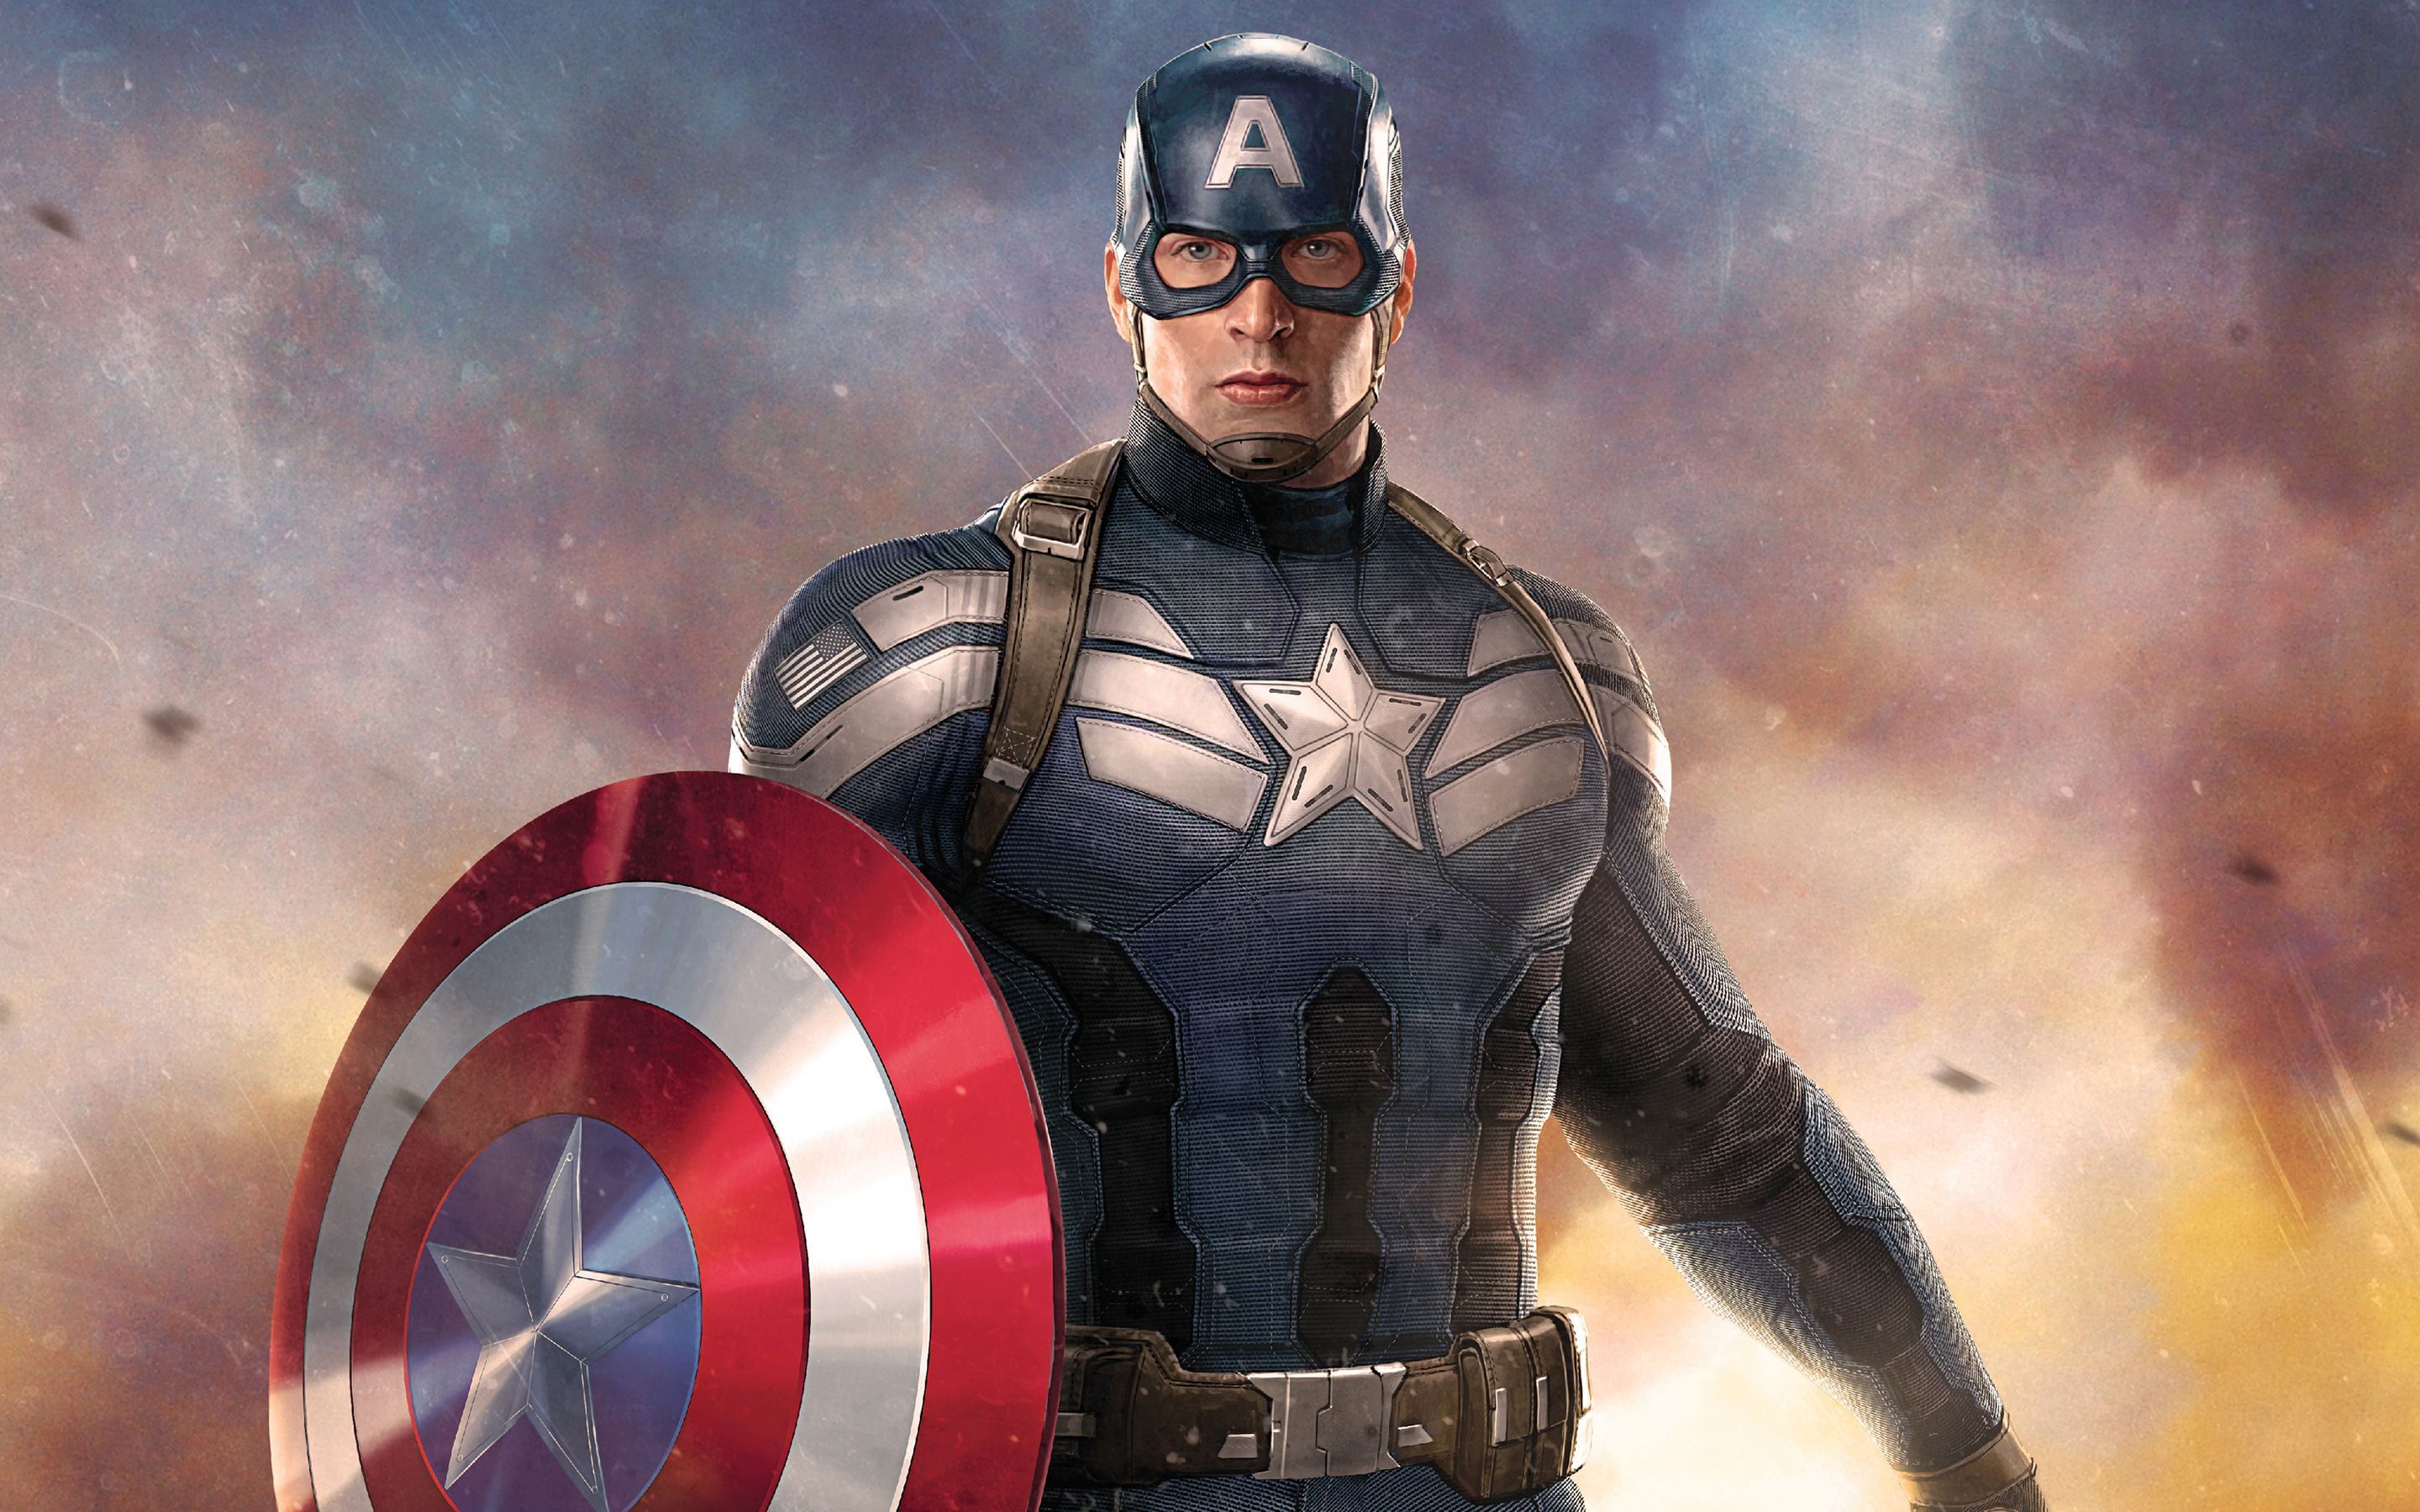 Body 4 (counter argument) -Mostly looks at the positives -Smarter, faster, stronger -I. Captain america wallpaper, Captain america statue, Captain america artwork